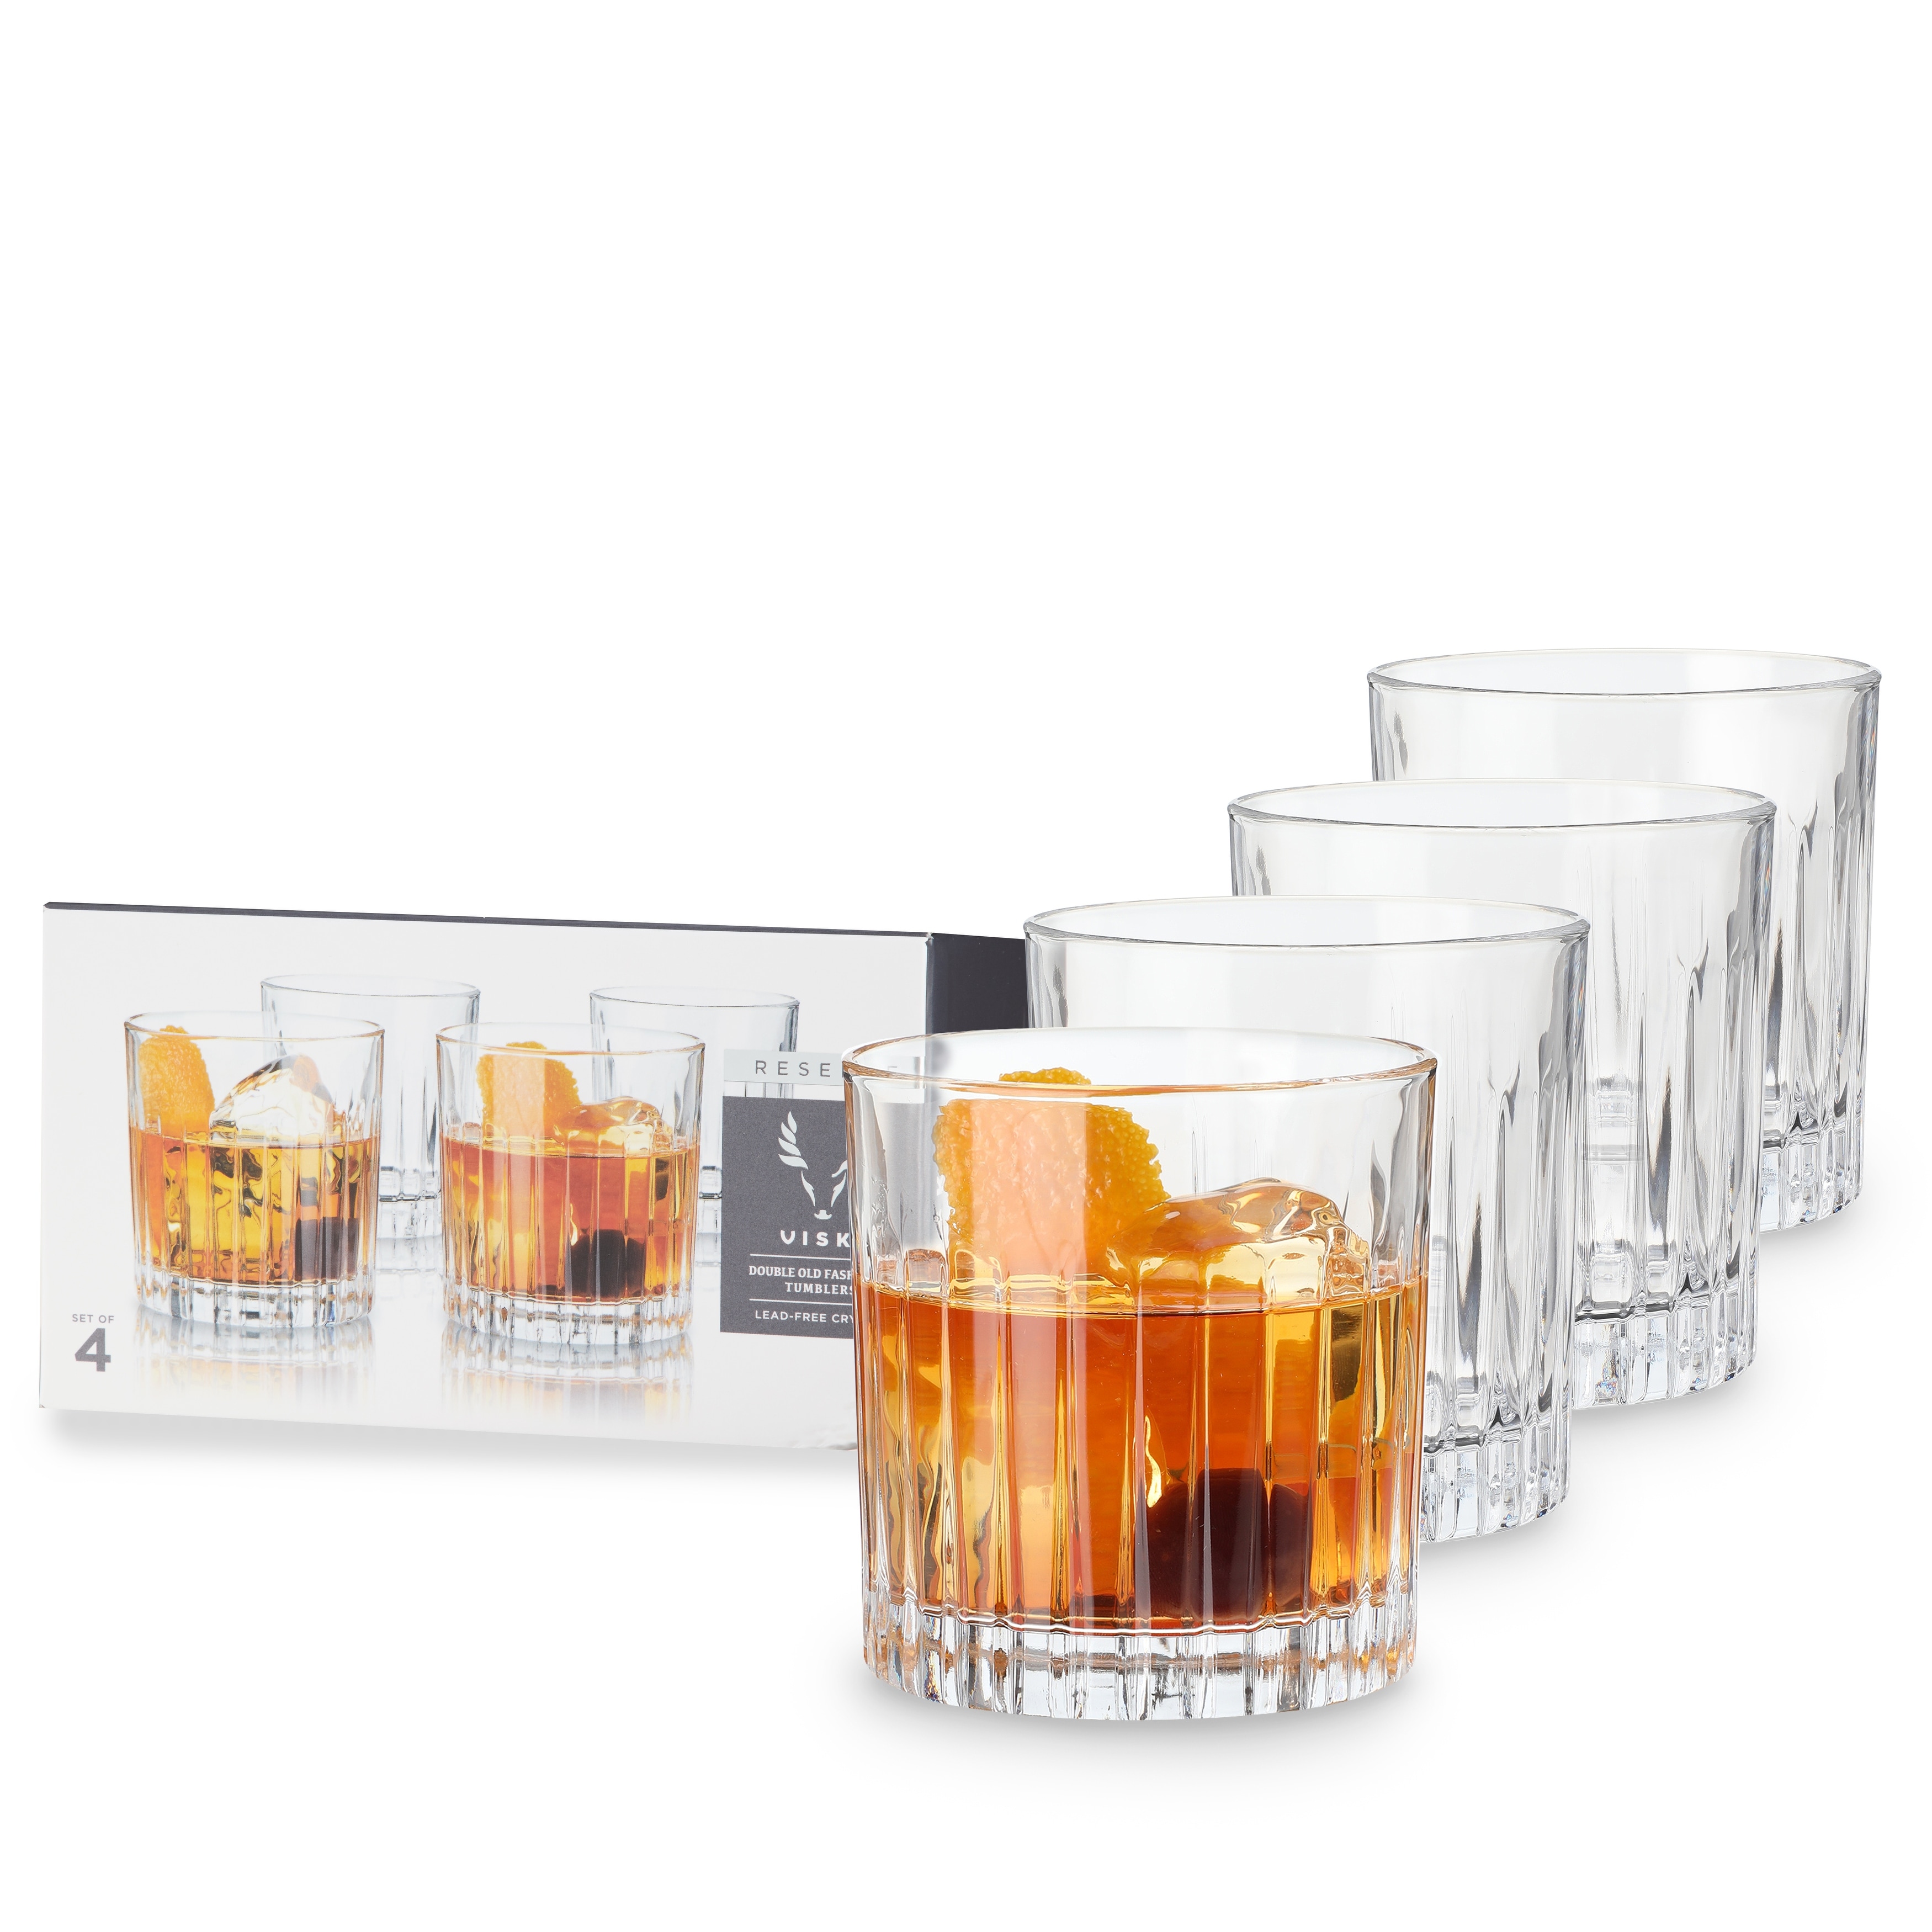 https://ak1.ostkcdn.com/images/products/is/images/direct/7b6a5ab7ab250d10896f3dff42040747fefd812f/Viski-D.O.F.-Tumblers%2C-4-Lead-Free-Crystal-Lowball-Cocktail-Glasses%2C-European-Made-Glassware%2C-Set-of-4%2C-12-Ounces.jpg